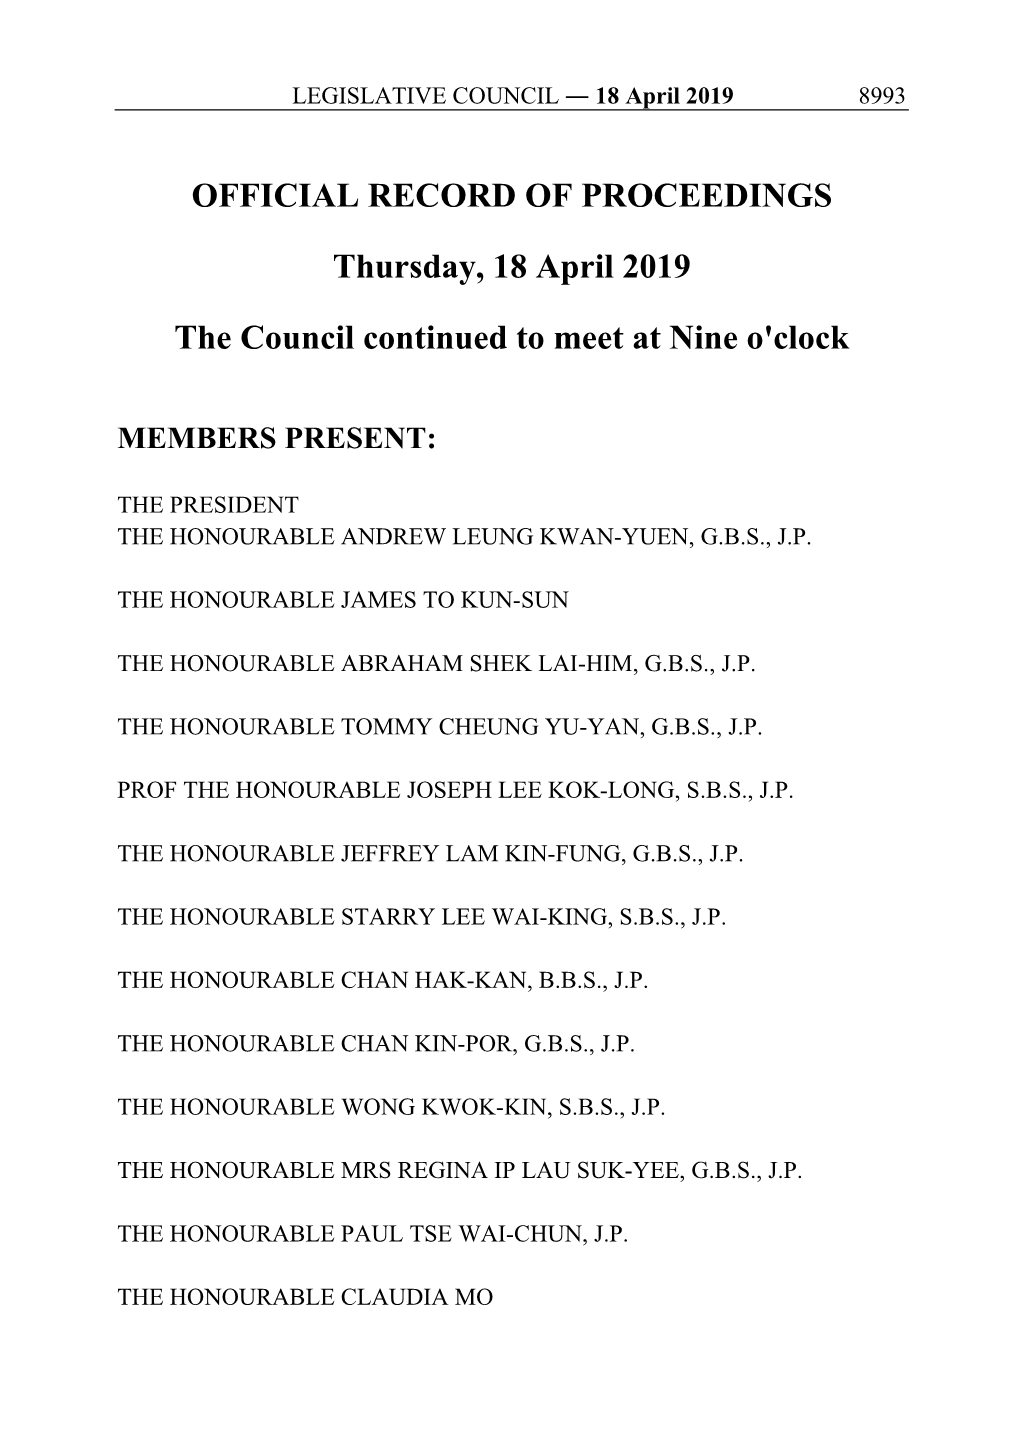 OFFICIAL RECORD of PROCEEDINGS Thursday, 18 April 2019 the Council Continued to Meet at Nine O'clock